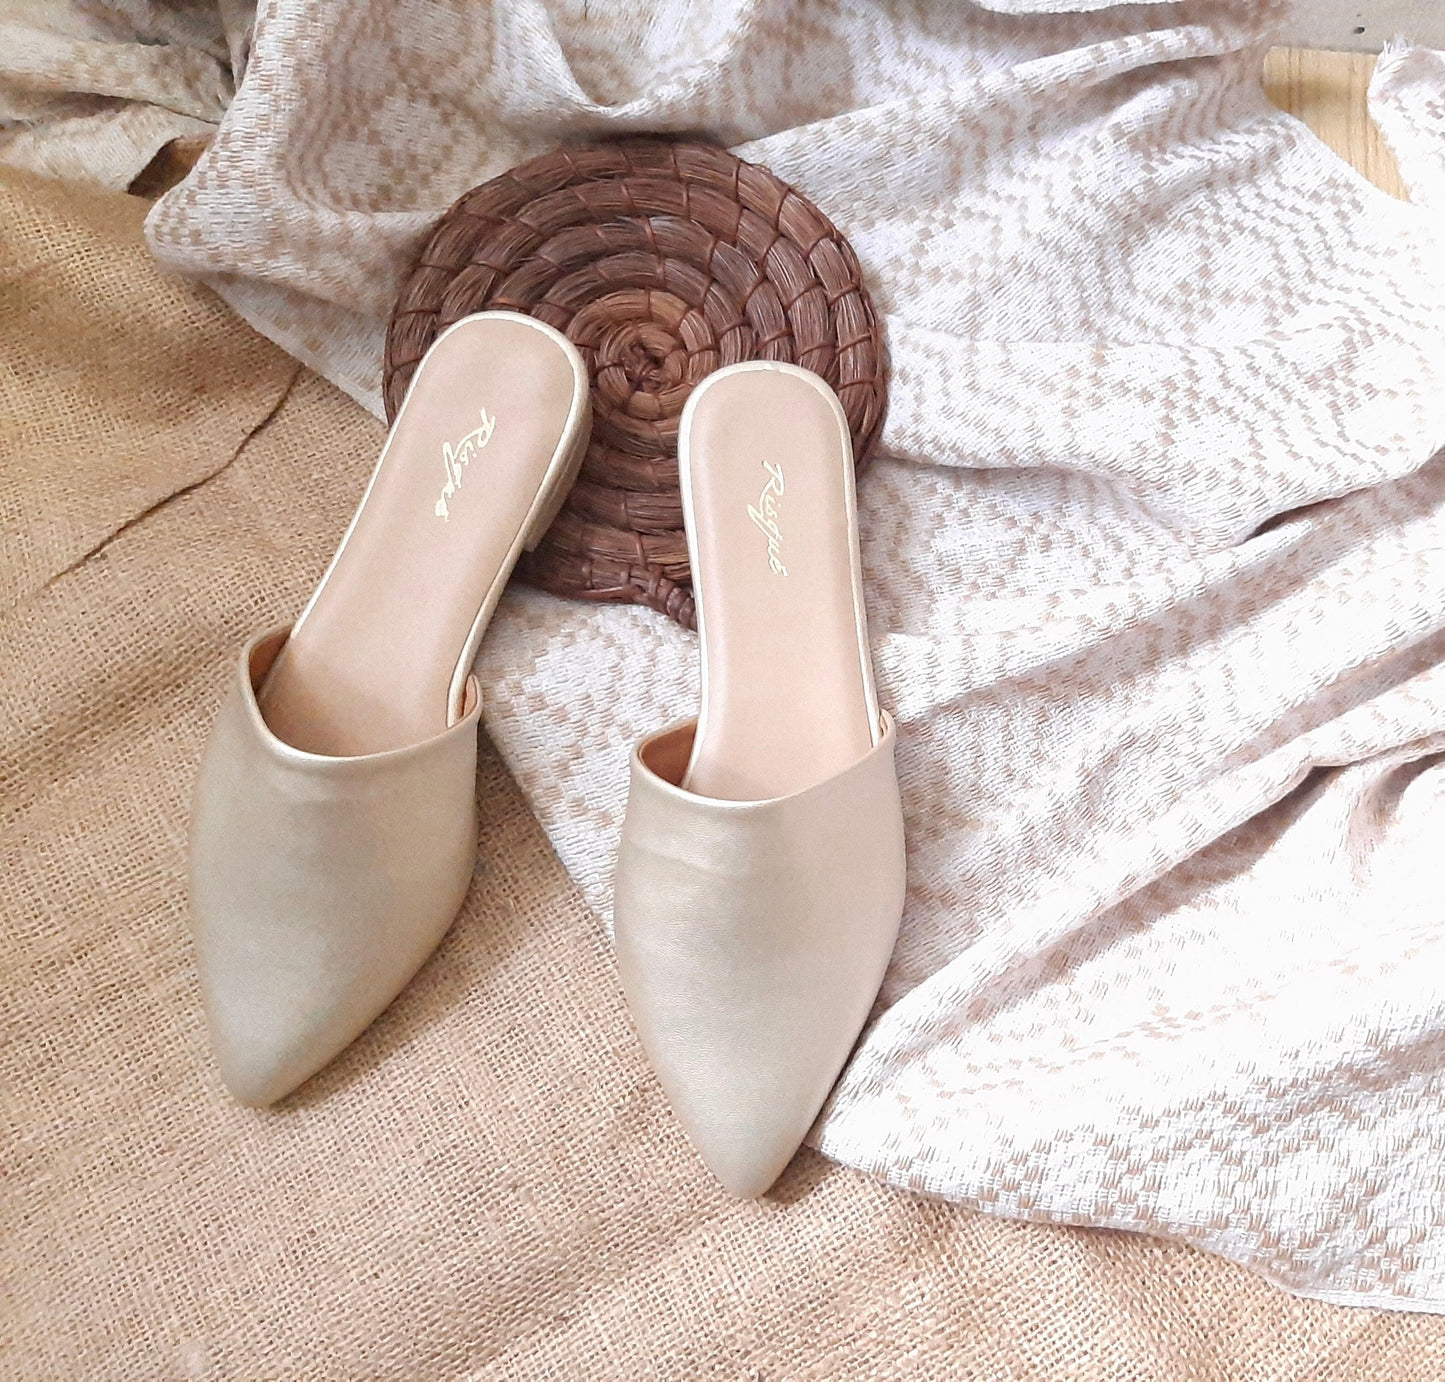 Pointed Mules - 4,5,9,10,11,12